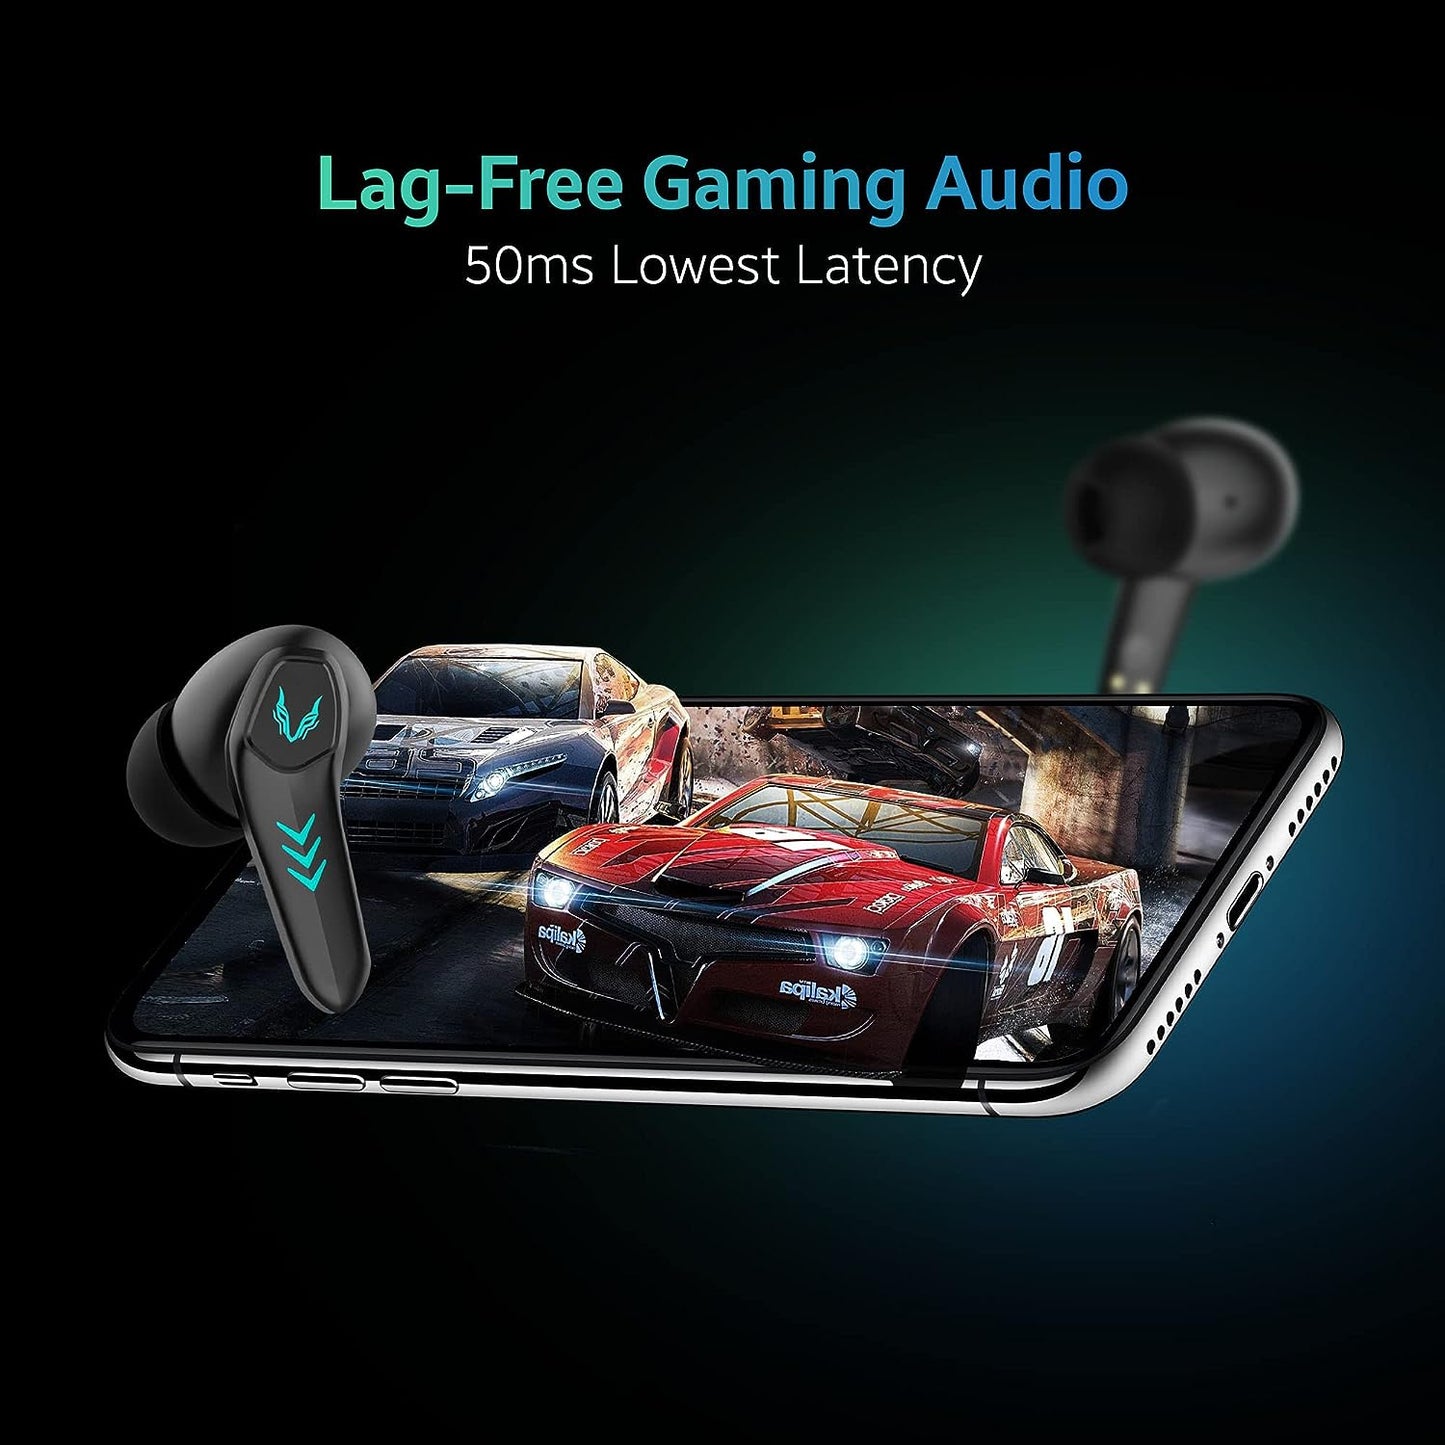 (Without Box) TAGG Rogue 100Gt Bluetooth Truly Wireless Gaming in Ear Earbuds with 50Ms Low Latency for Better Gaming 20Hrs Playtime with Mic with Enc for Best Calling Made for Comfort Gaming